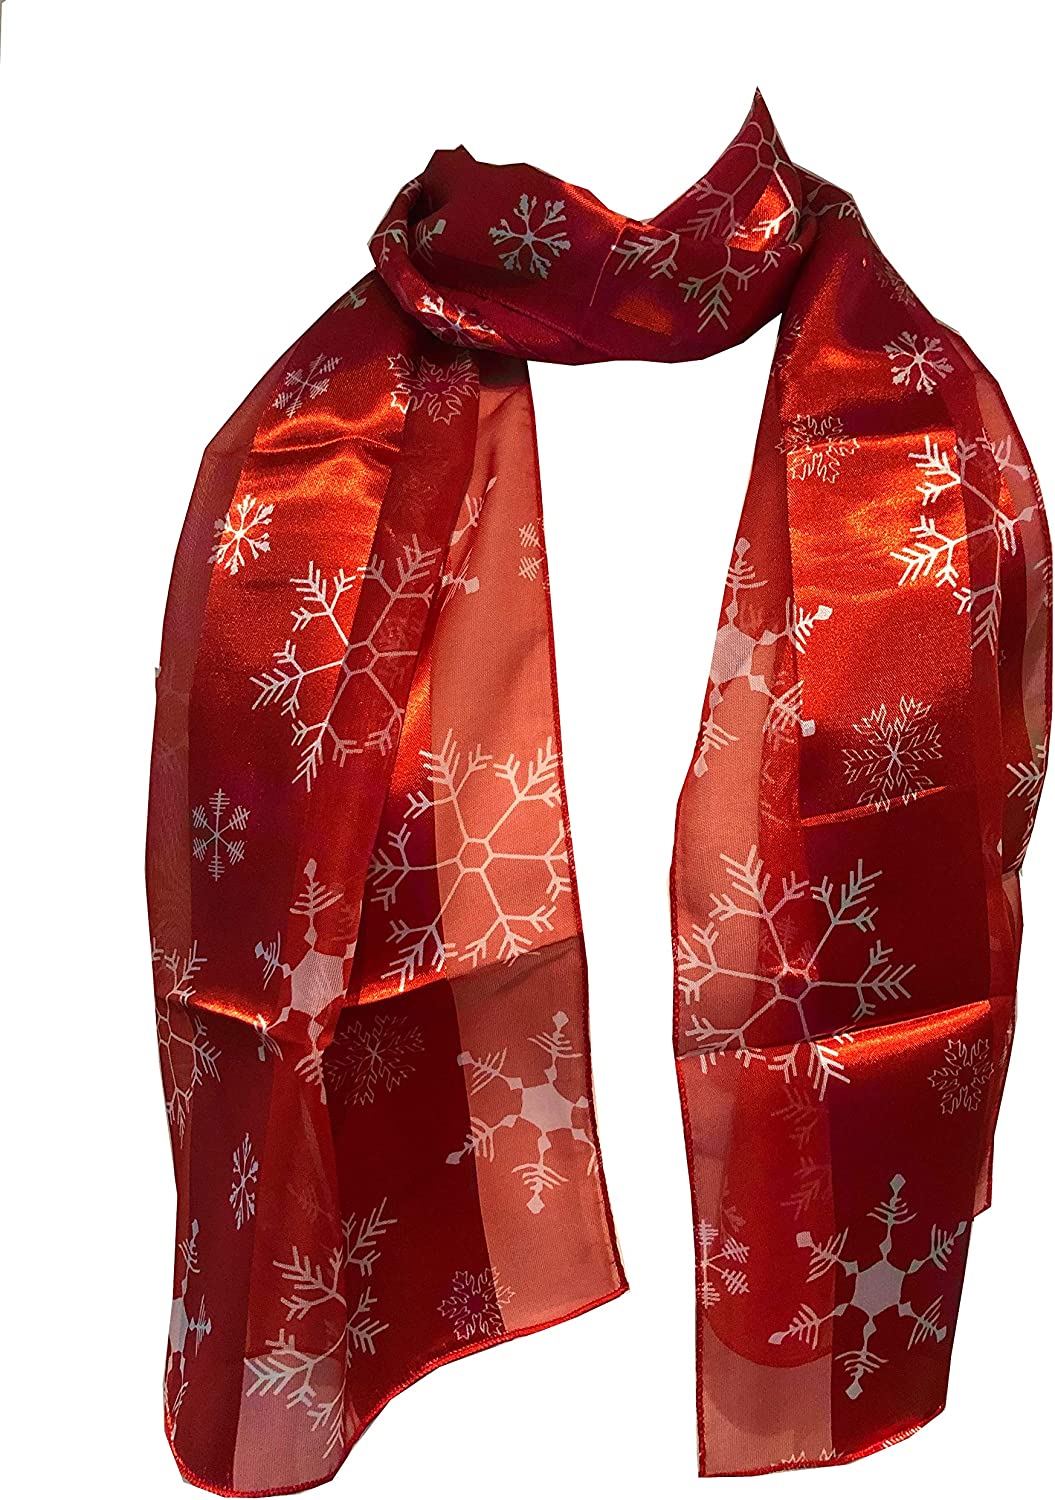 Pamper Yourself Now Red Christmas Snowflake Design Scarf, Lovely Chrismas Scarf Great for Presents.